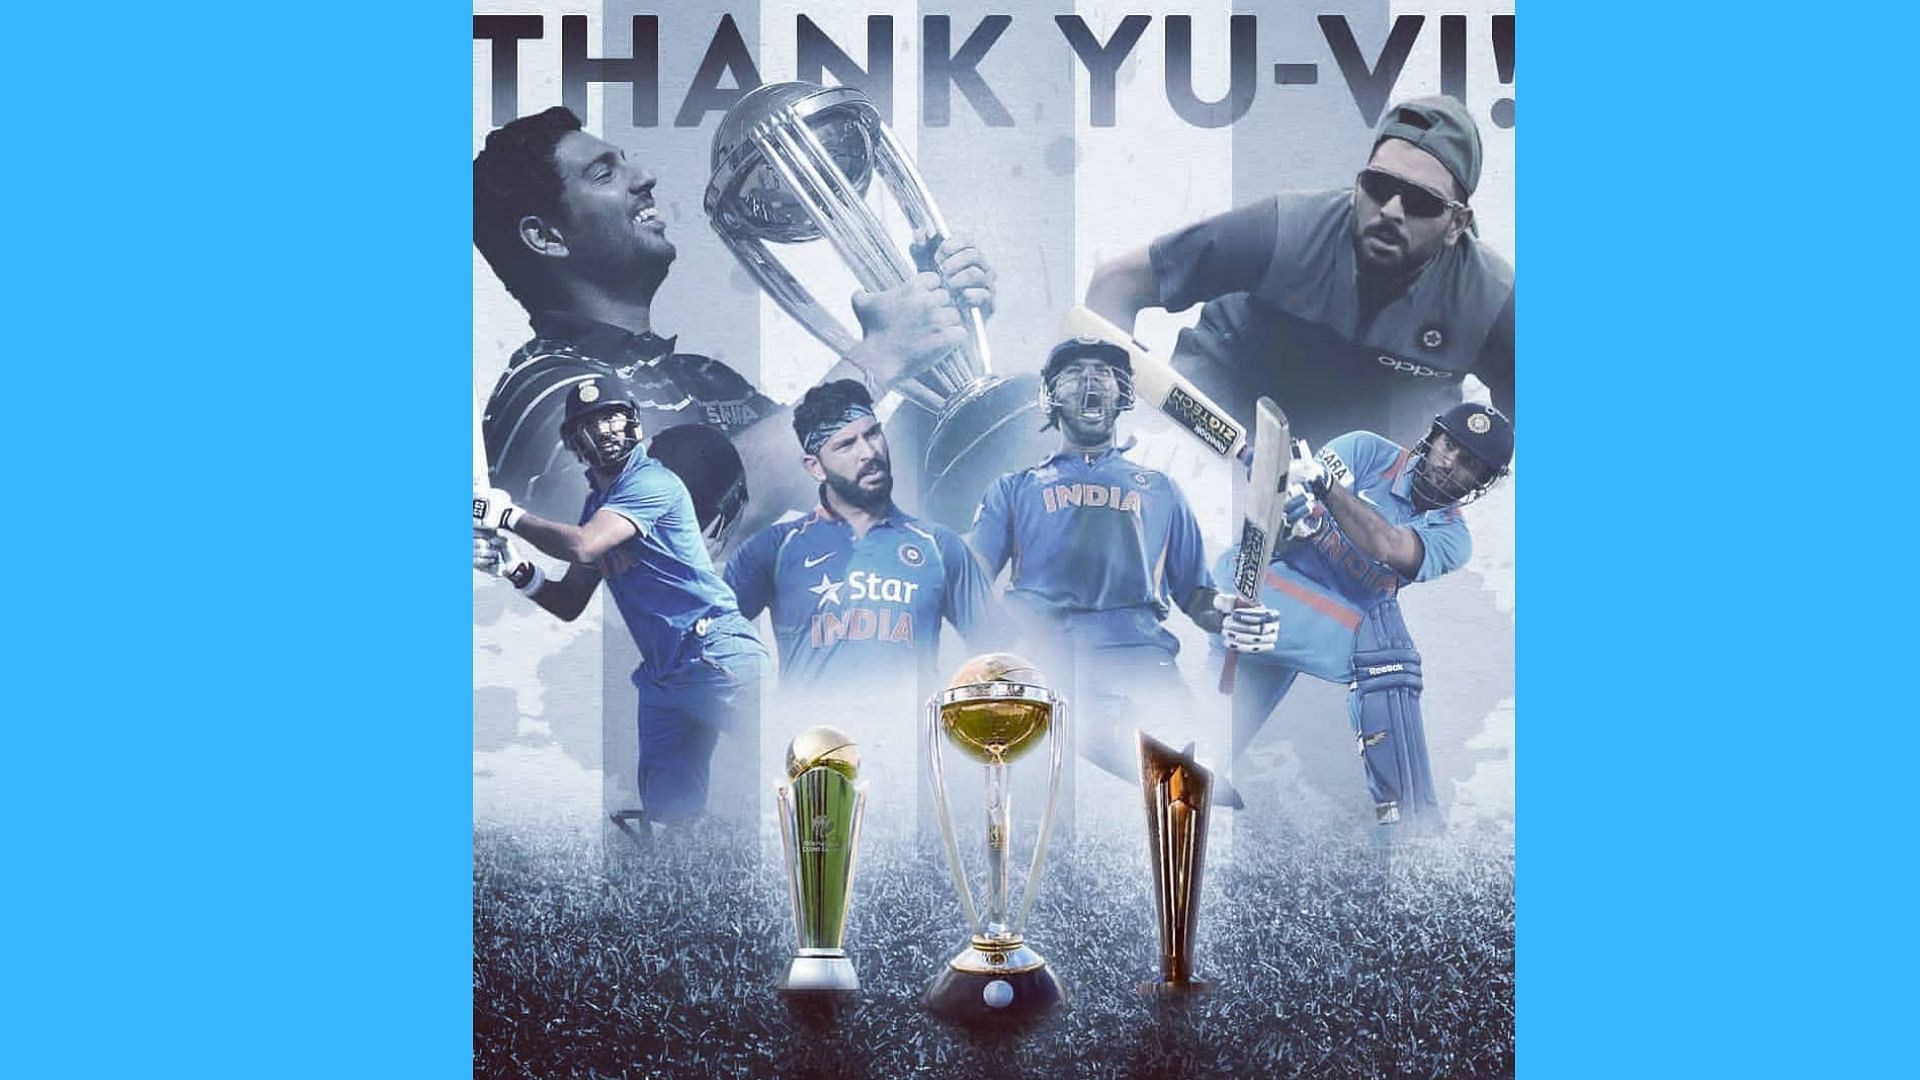 Yuvraj Singh’s fans had an emotional outburst as the legend announced his retirement and demanded a proper farewell for him.